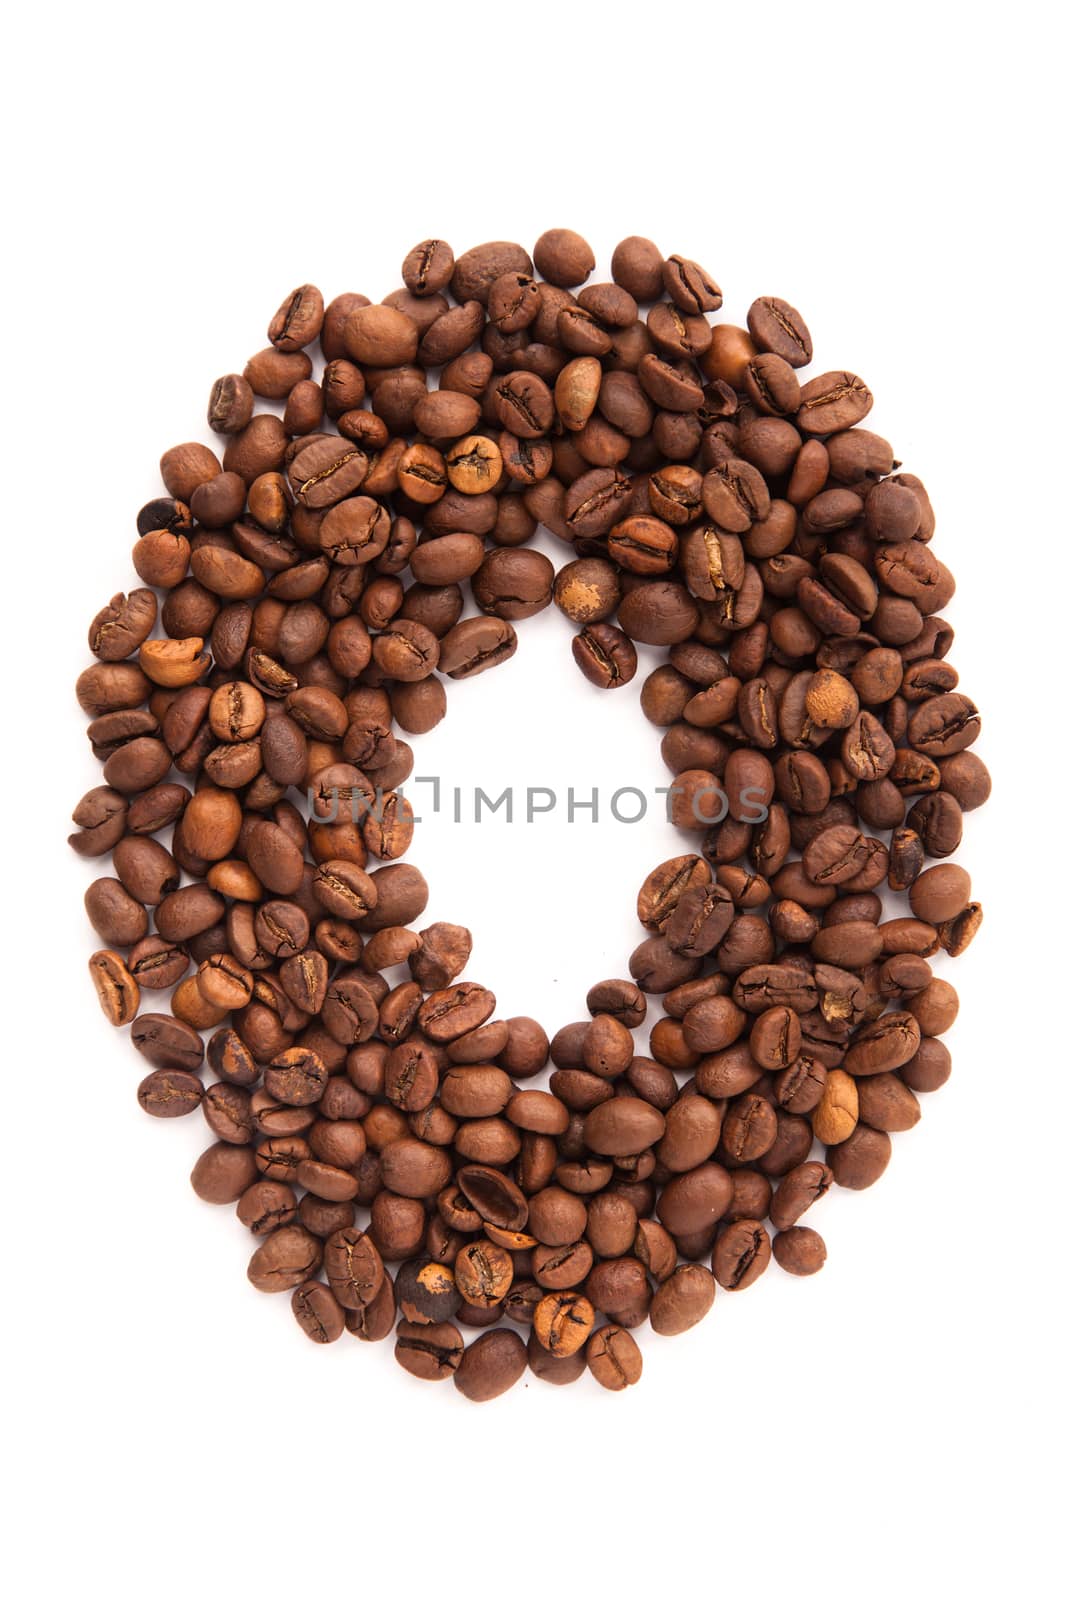 Alphabet letter O of roasted coffee beans isolated on white background